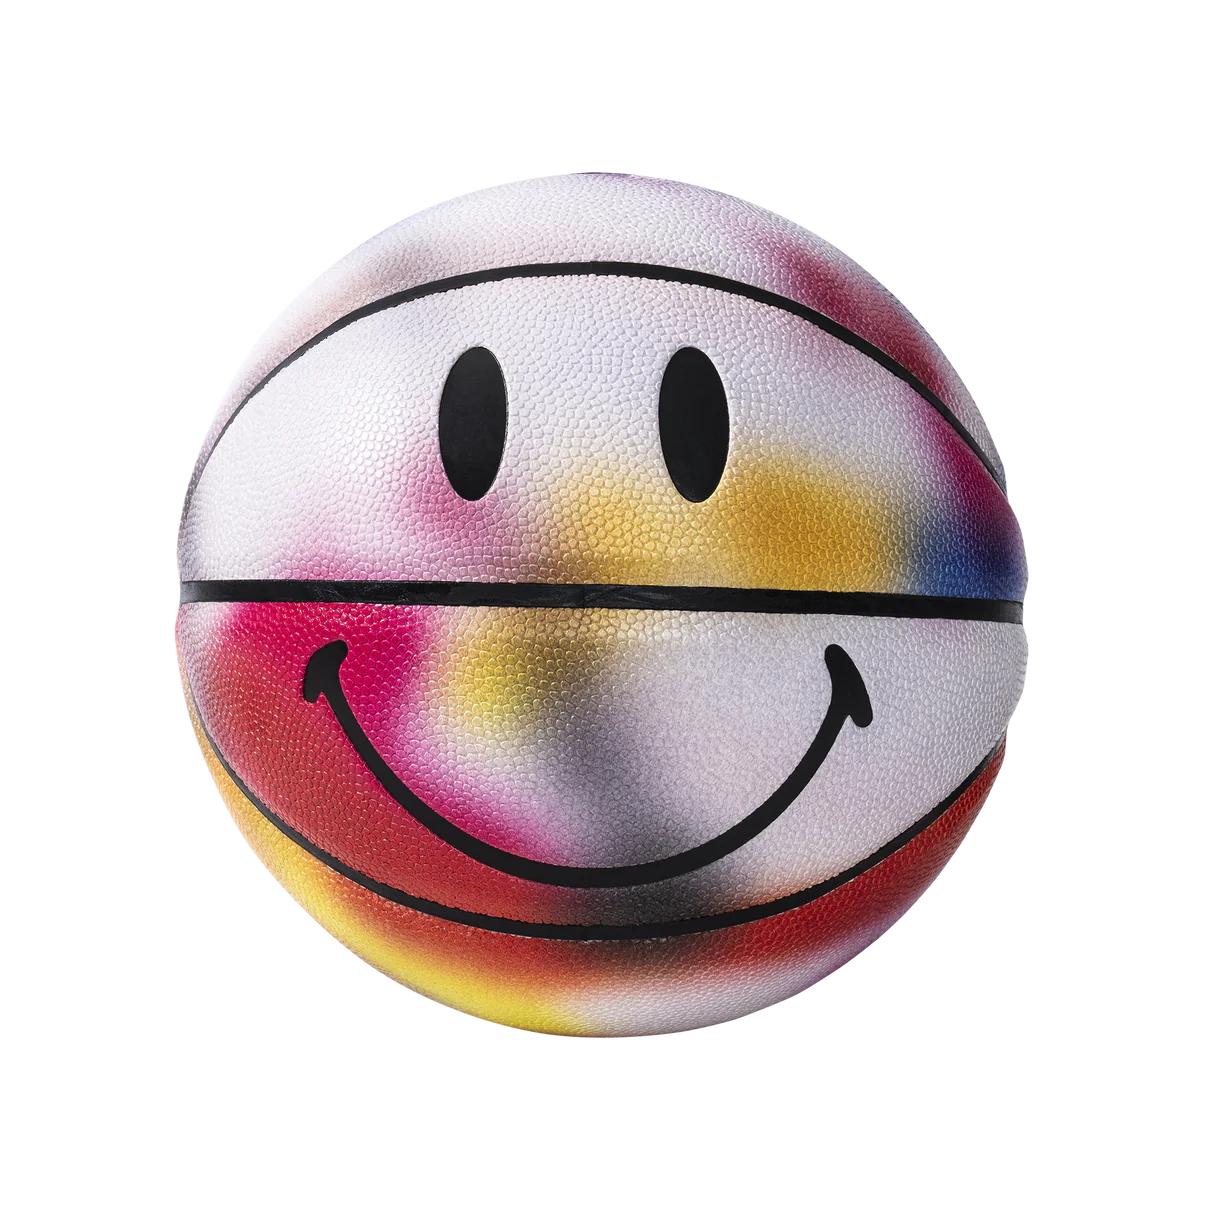 SMILEY NEAR SIGHTED BASKETBALL - MULTICOLOR PATTERN